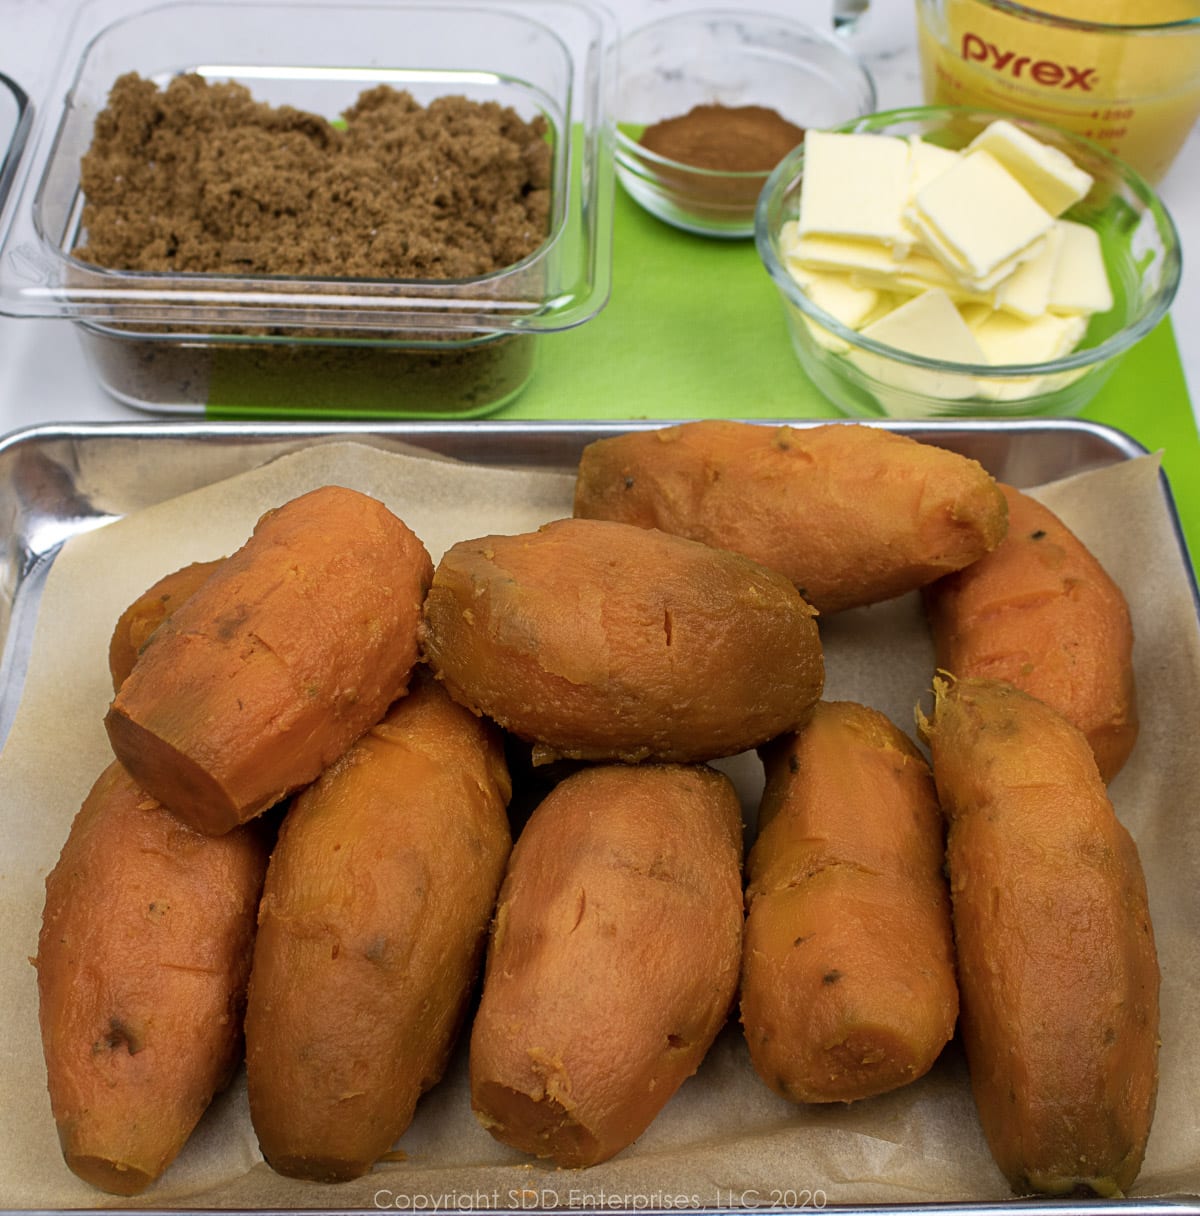 sweet potatoes and other ingredients for candied yams